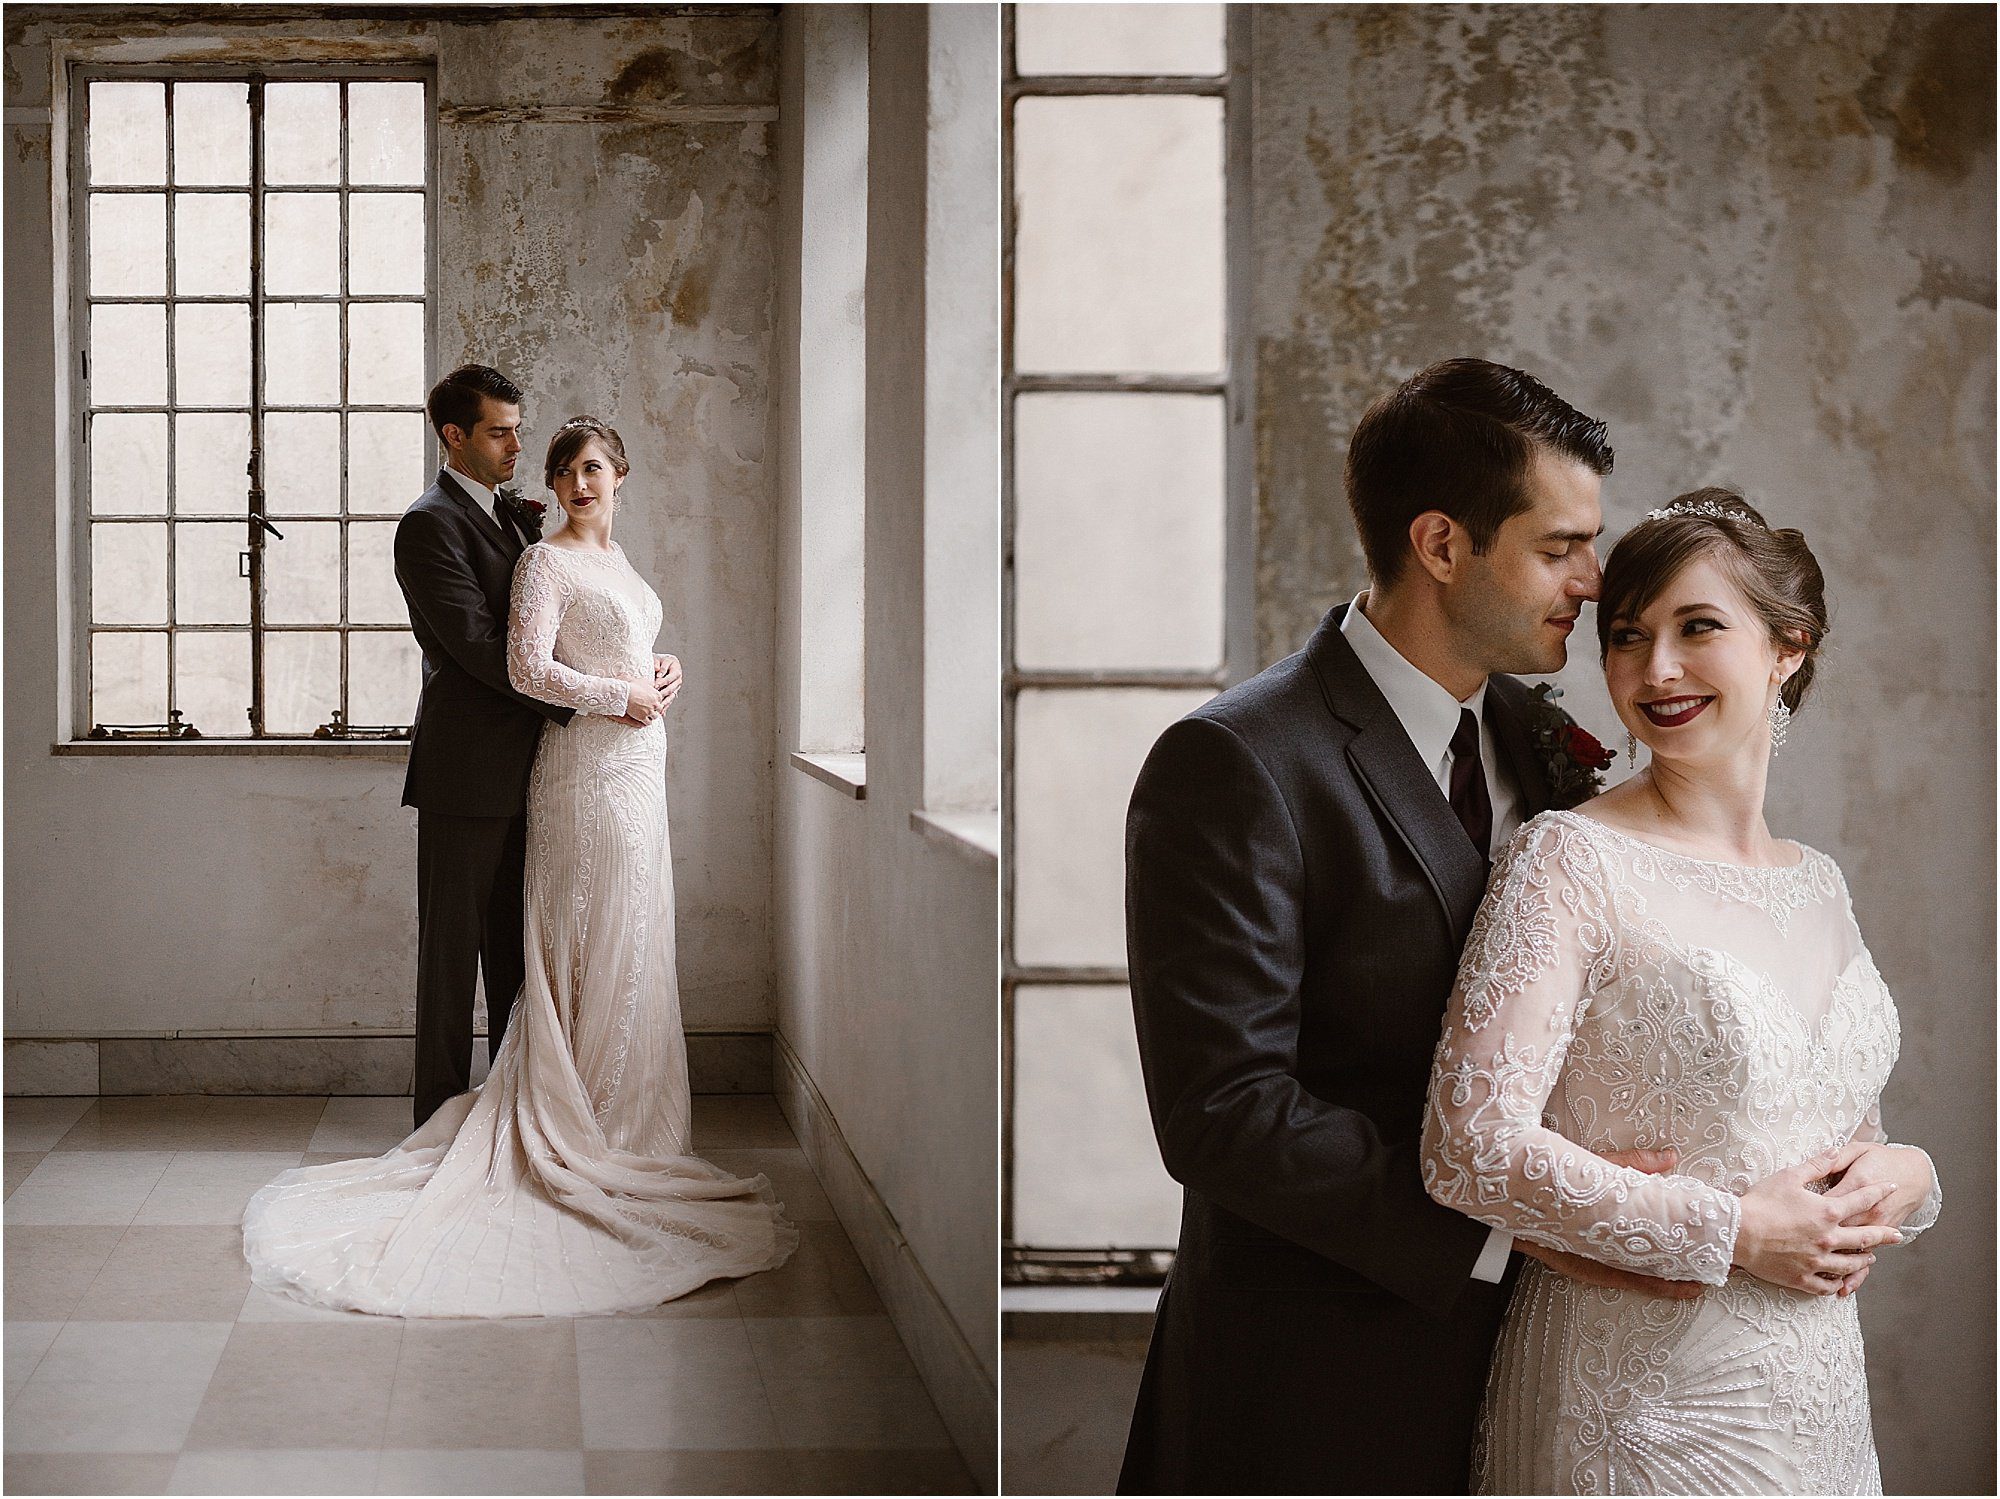 Modern Moody Summer Wedding Inspiration in Knoxville | Erin Morrison Photography www.erinmorrisonphotography.com